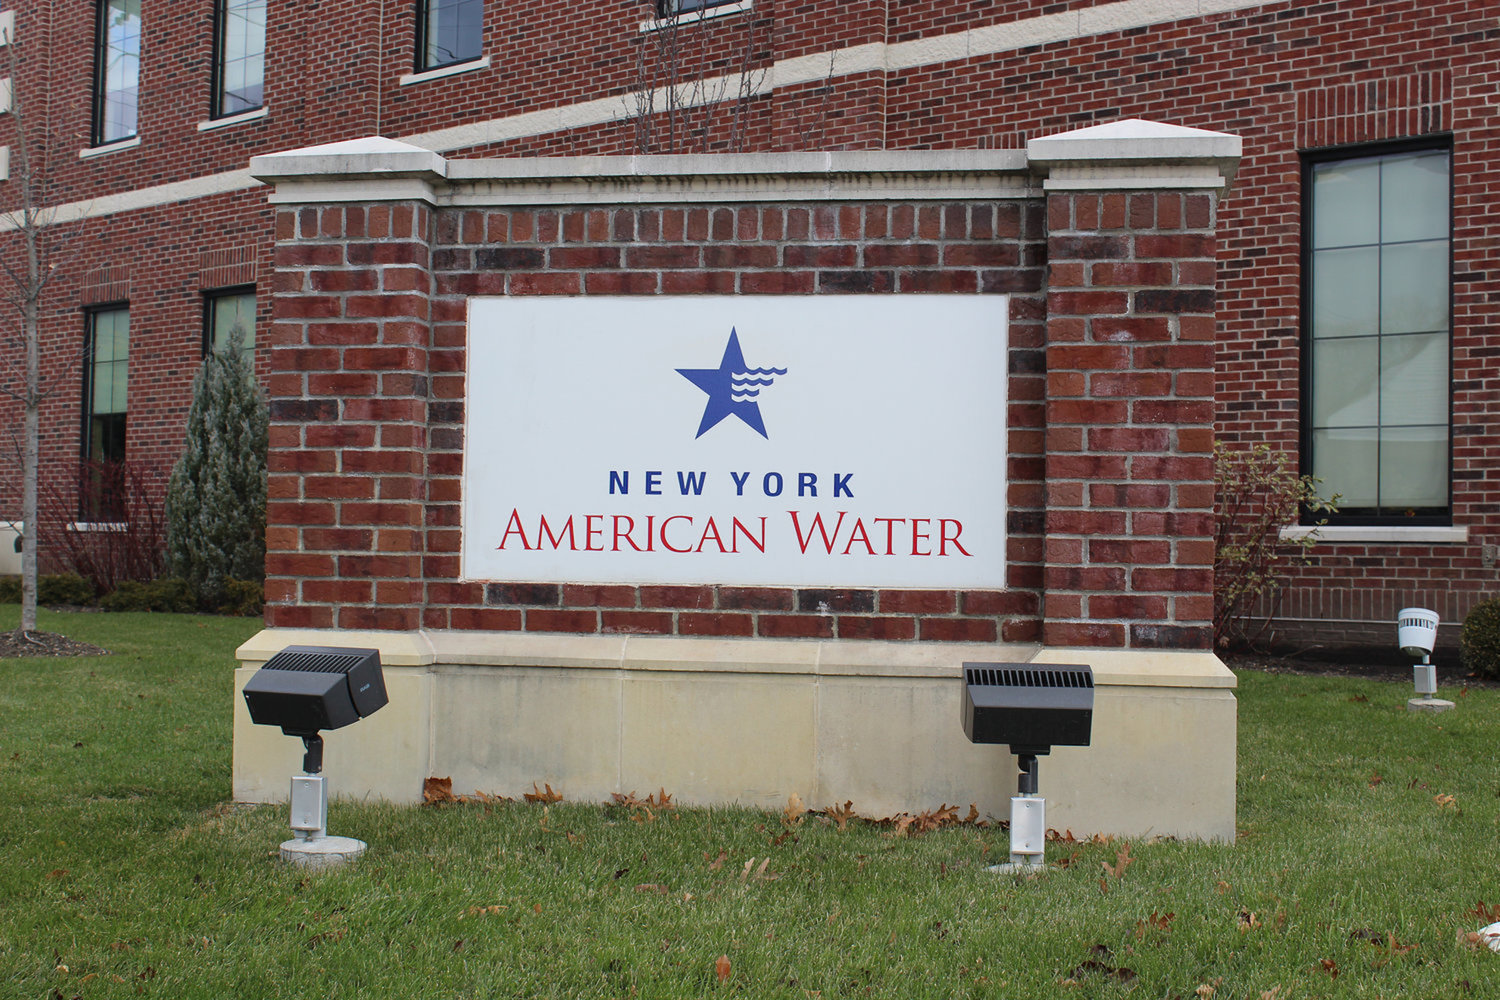 New York American Water’s corporate headquarters in Merrick. NYAW representatives filed a joint settlement to complete the sale of its operations to Liberty Utilities on Nov. 3.